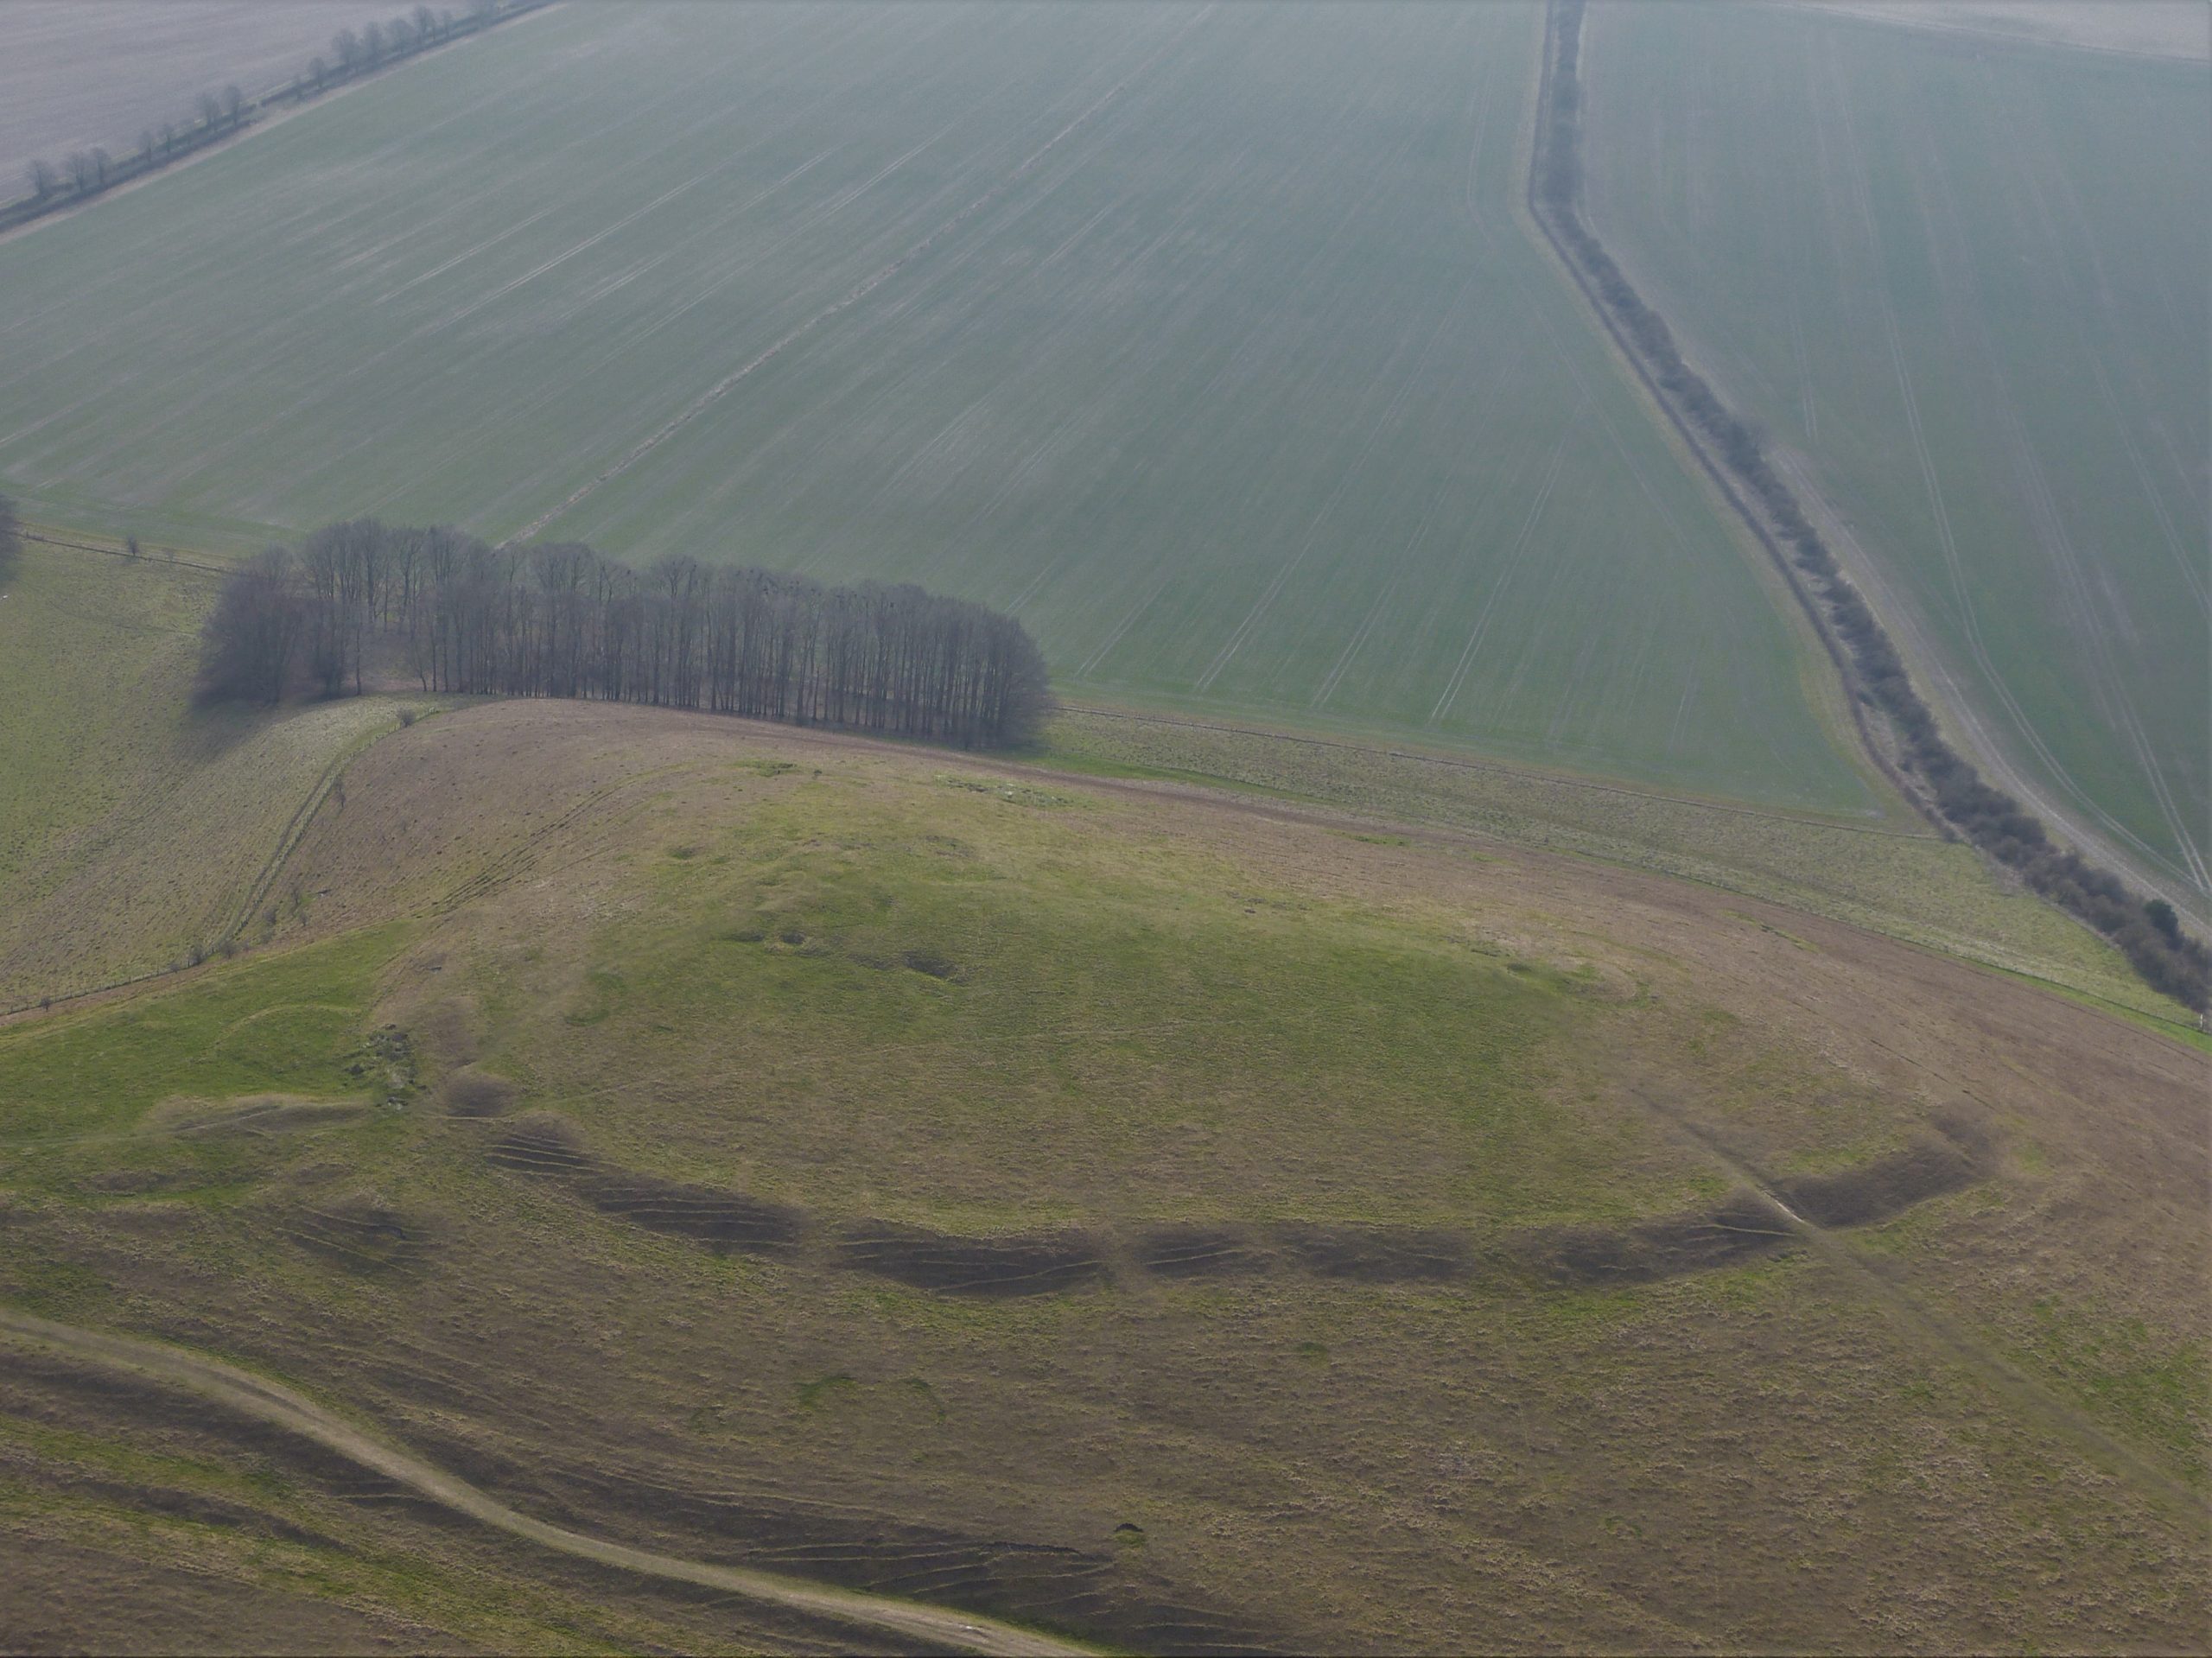 Knap Hill Causewayed Enclosure from the air